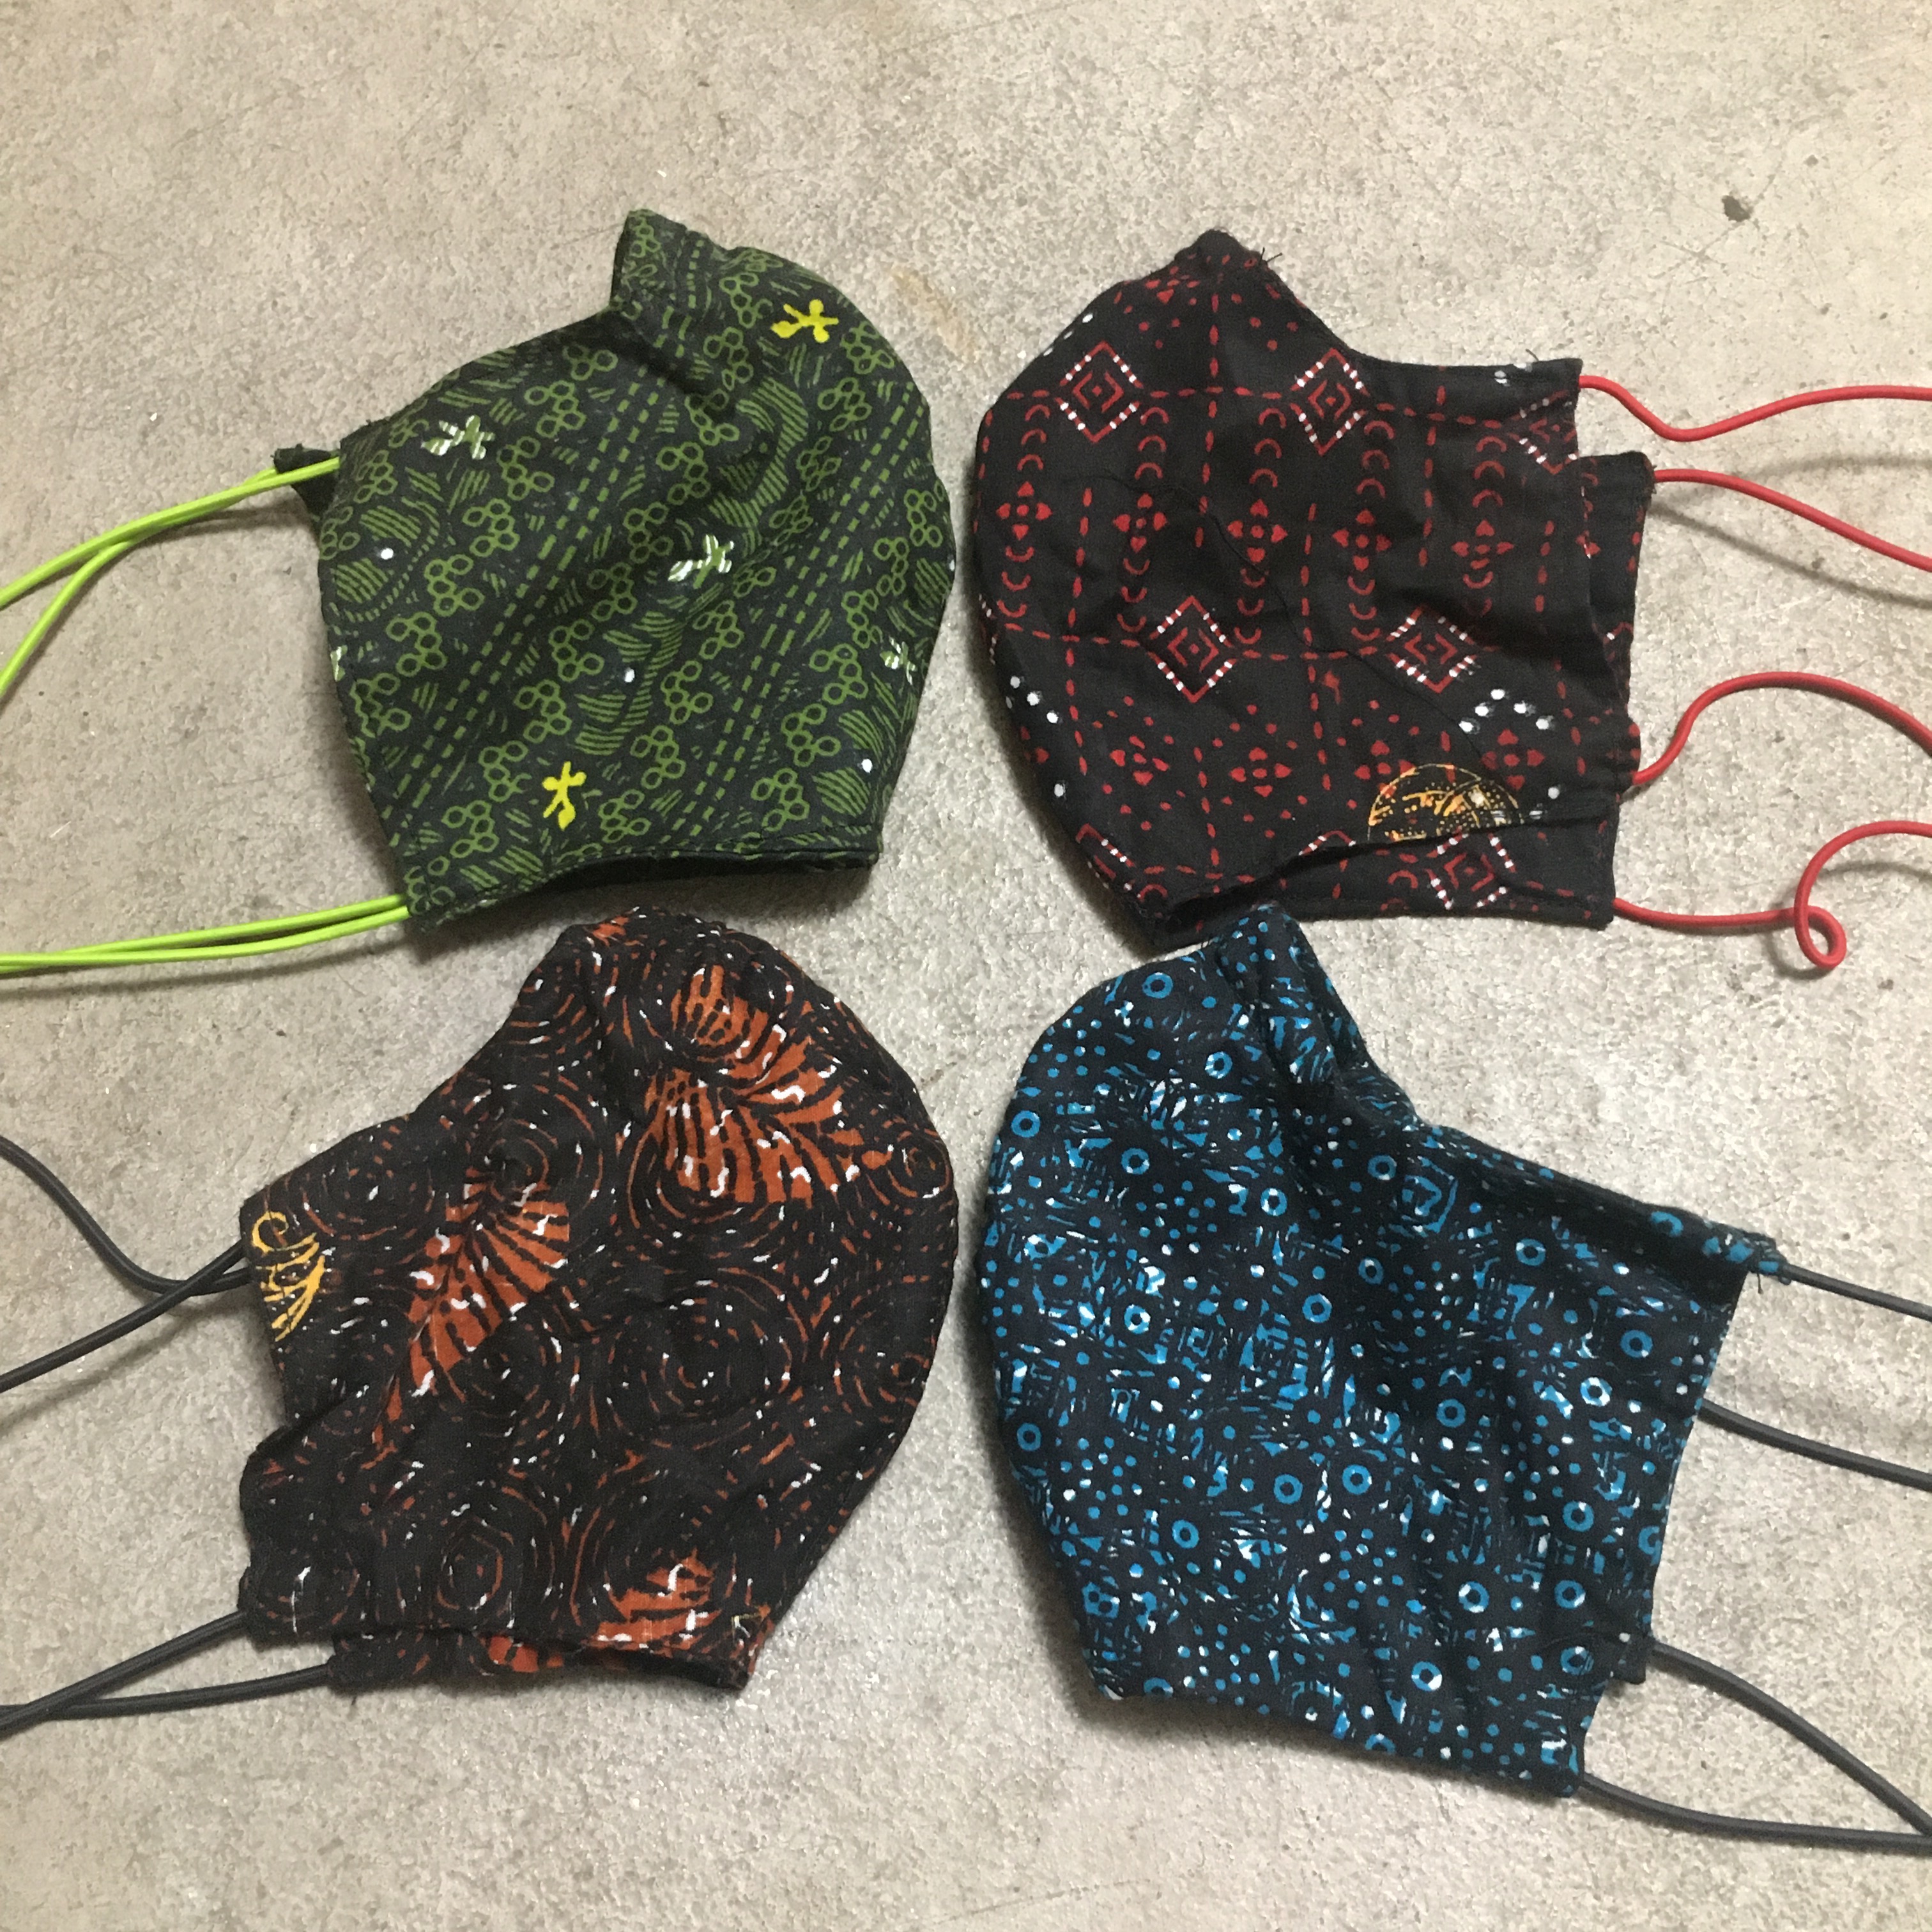 With a global pandemic in progress, I also made matching face masks for each shirt with the fabric scraps. 